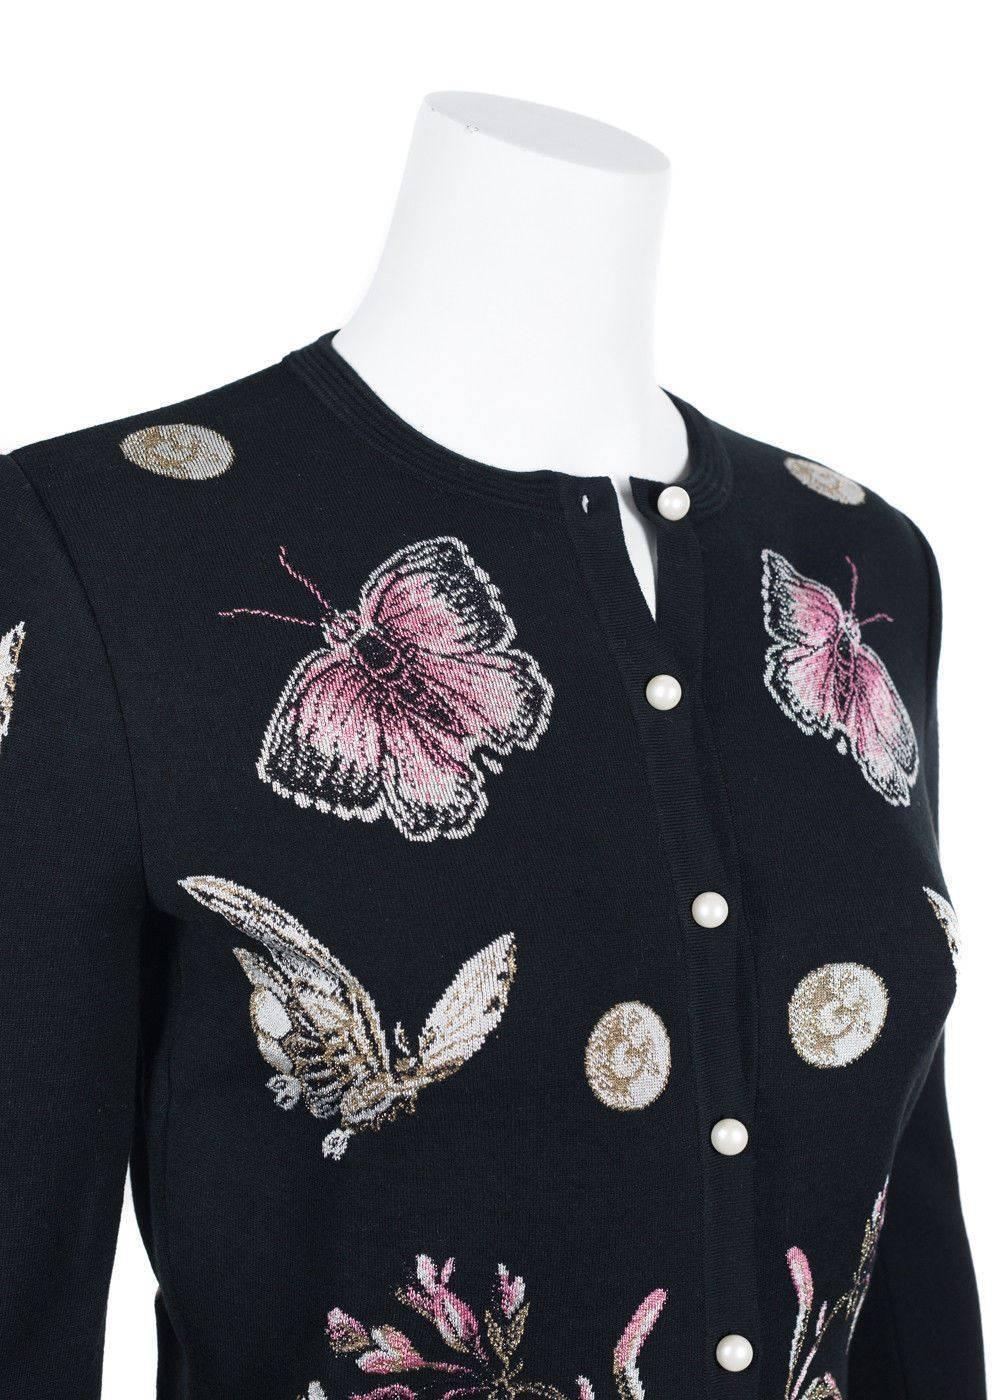 Brand New With Tags
Retails Online and In-stores for $1775
Size Small True to Size


Blossom in your 'Butterly' cardigan from Alexander McQueen. This wool blend beauty was crafted in Italy using silk, wool, and metallic lurex. This cardigan is